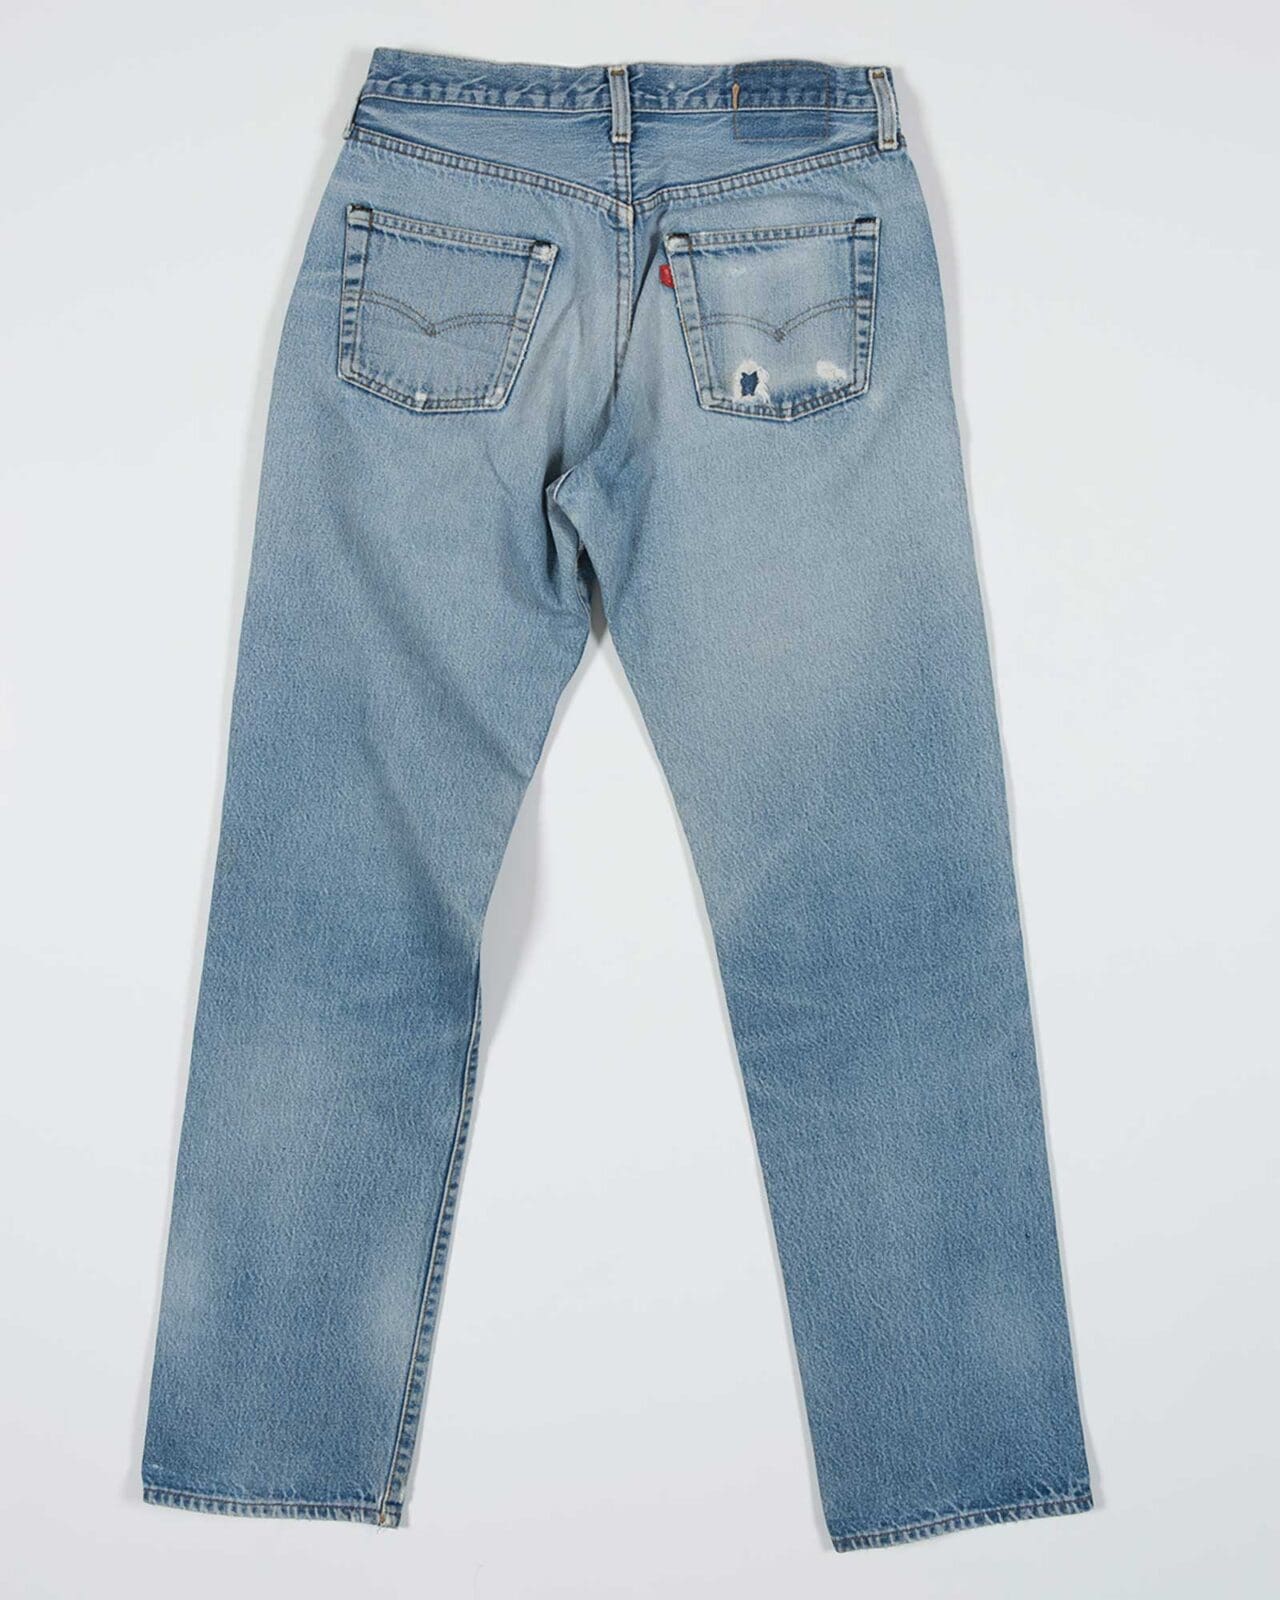 Revisiting Historical Americana Through A 133-Year-Old Pair of Levi's 501s